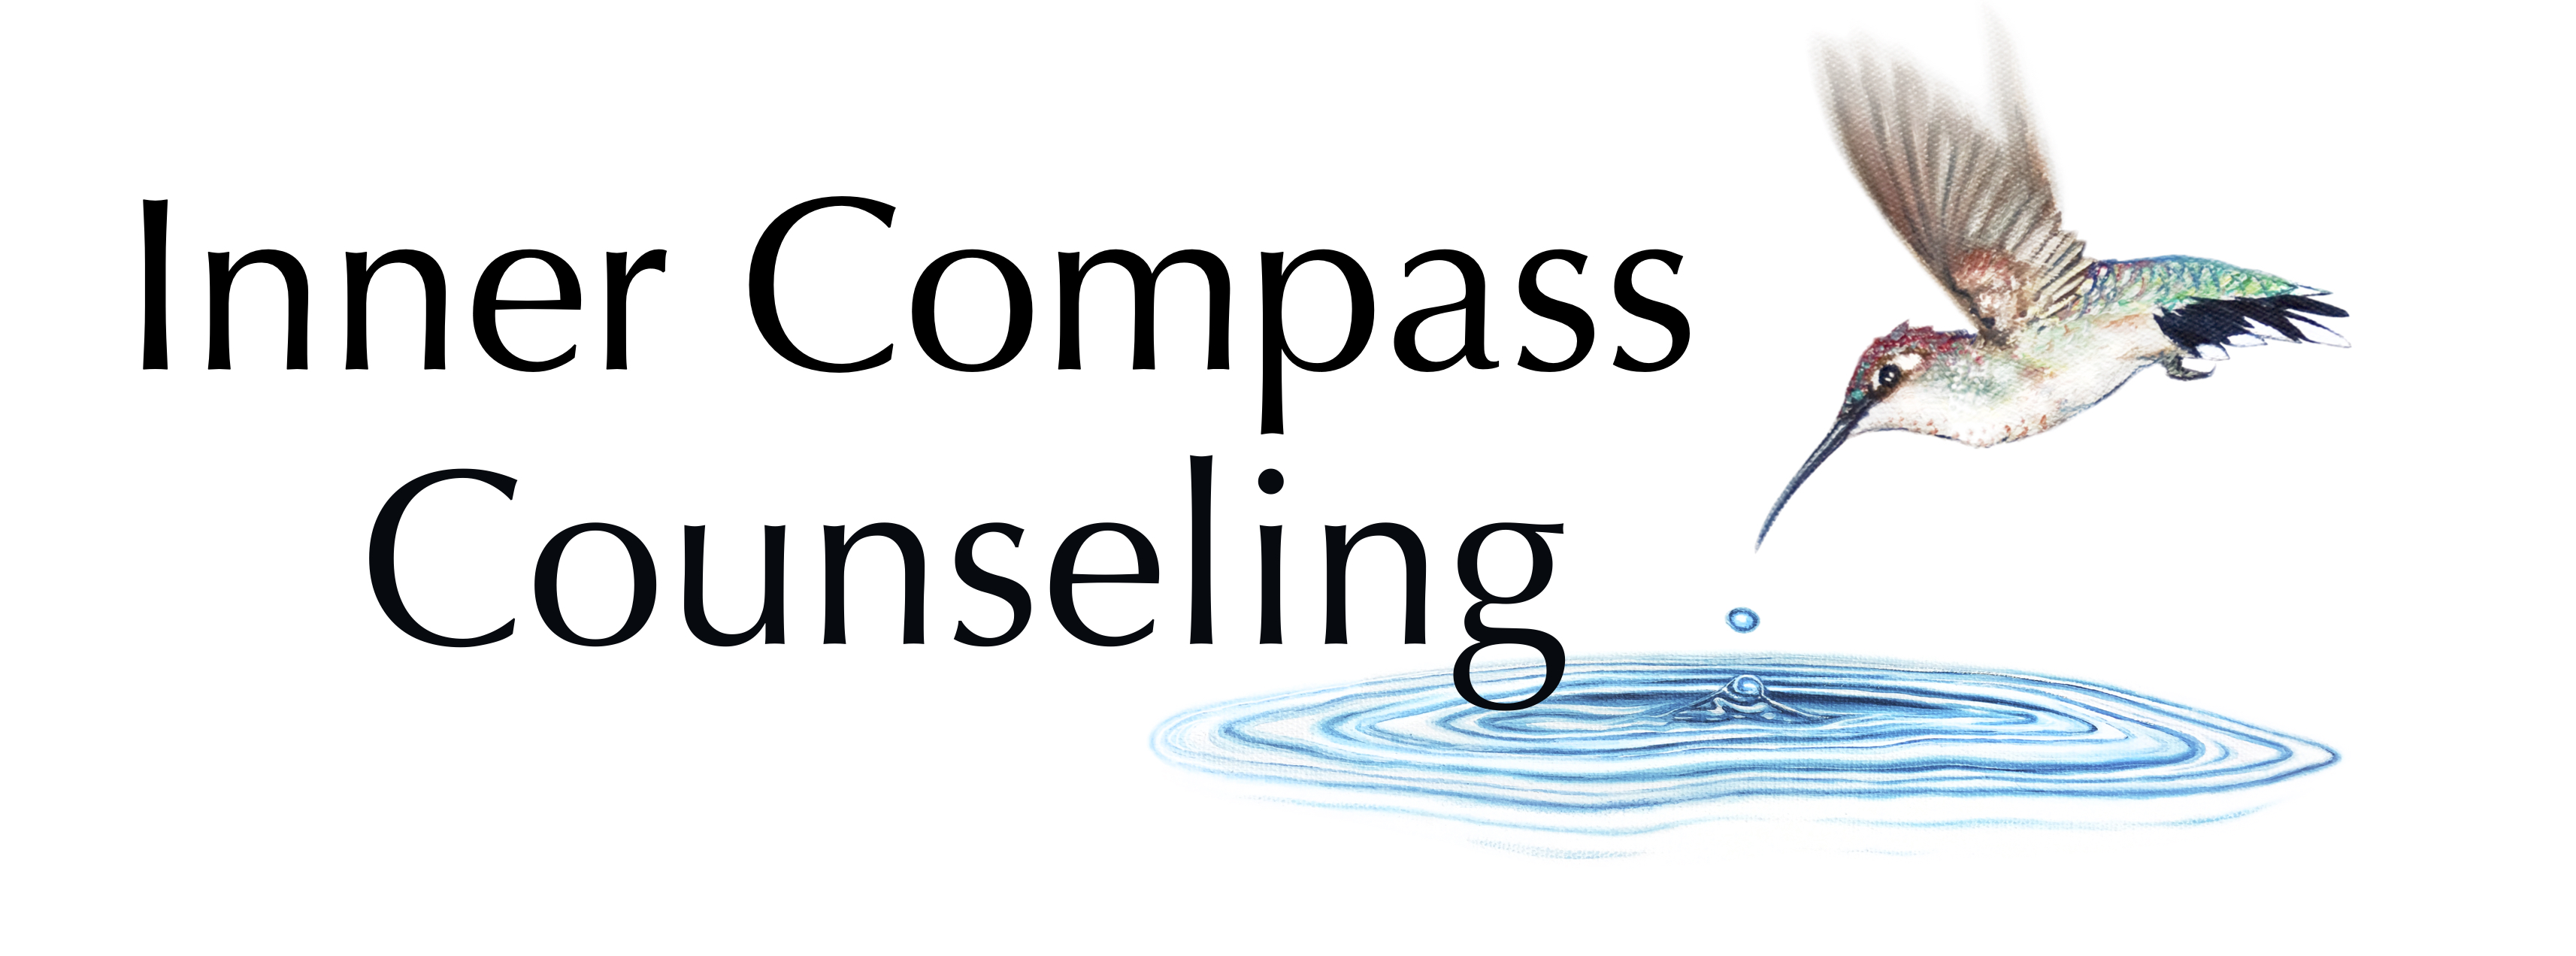 Inner Compass Counseling